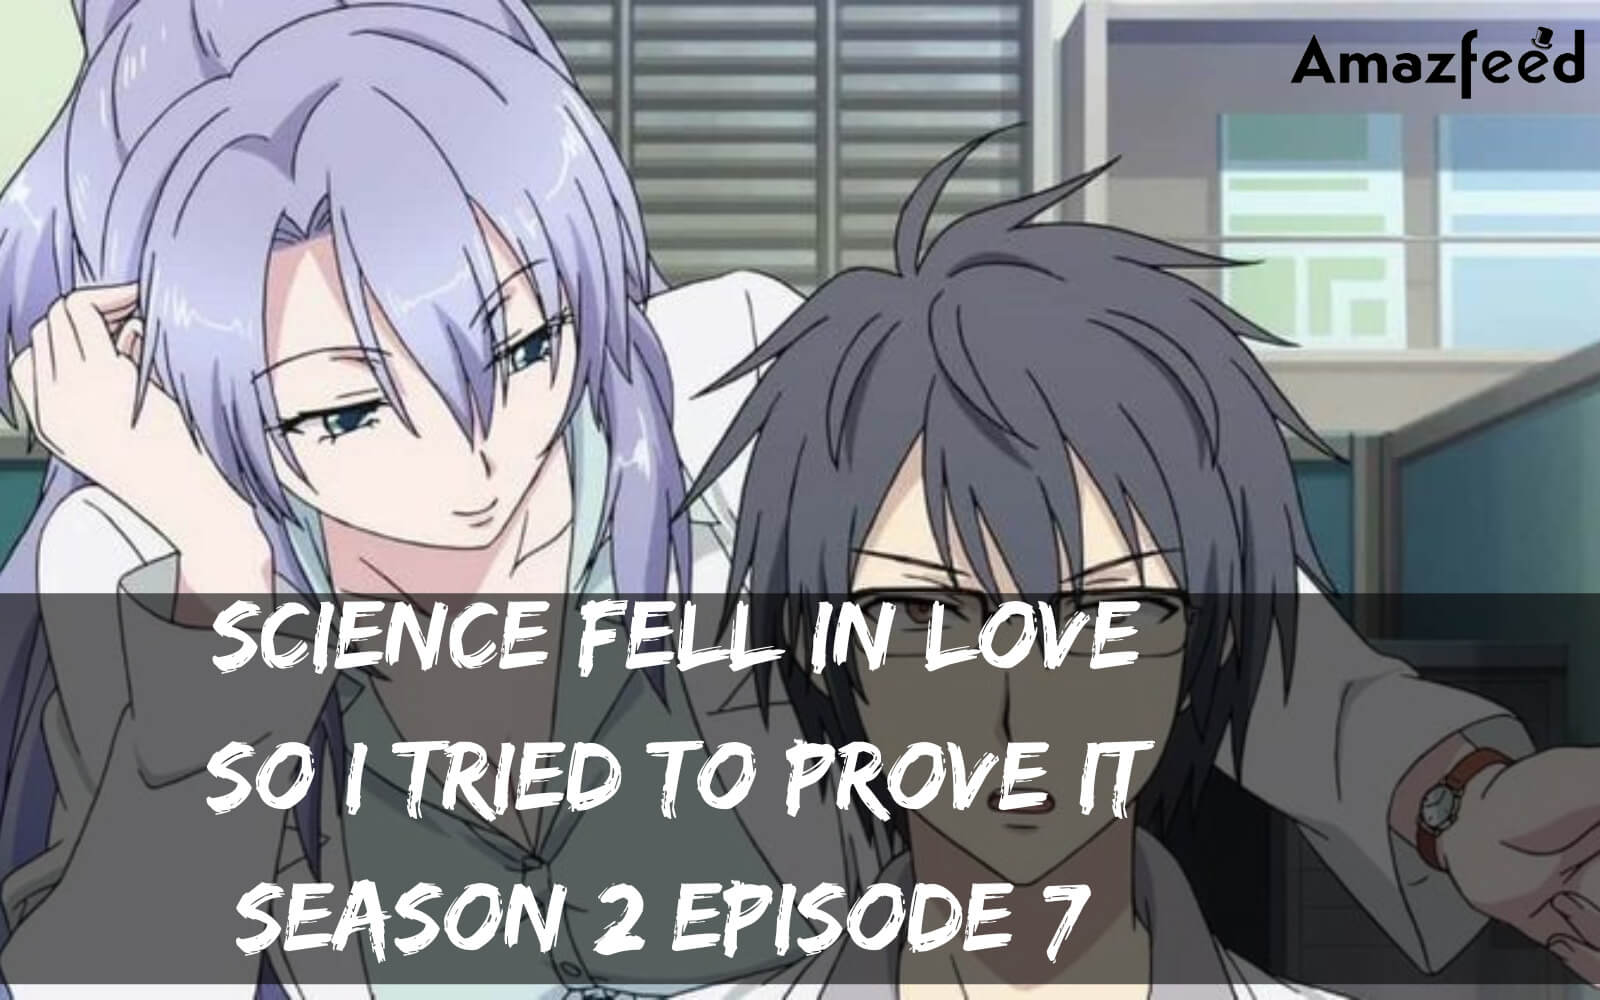 Science Fell In Love So I Tried To Prove It season 2 Episode 7 release date